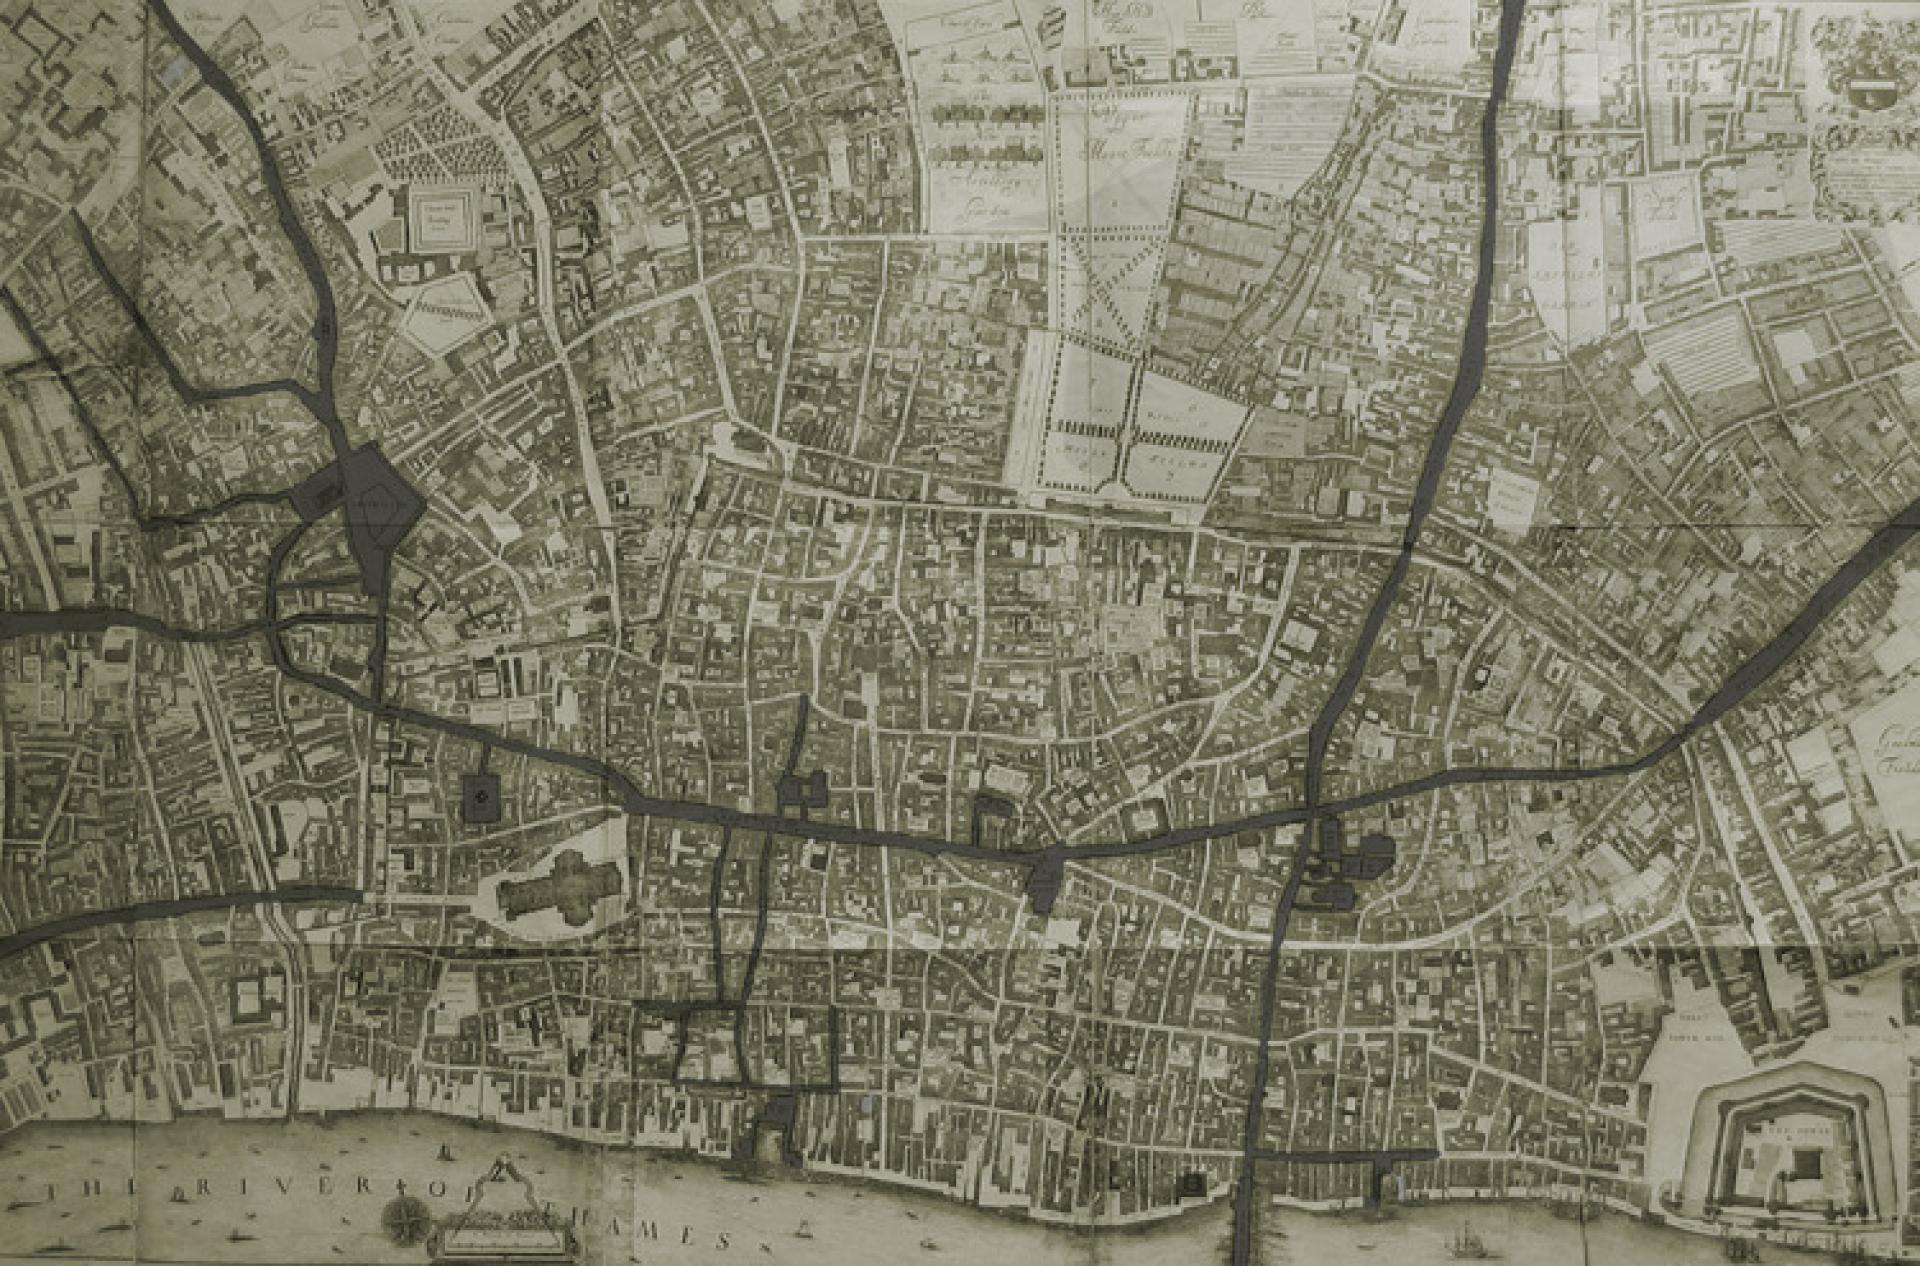 A city shaped by food: seventeenth-century London’s food markets and supply routes. | Photo © John Ogilby: A Large and Accurate Map of the City of London (1676); London and Middlesex Archaeological Society (1894)